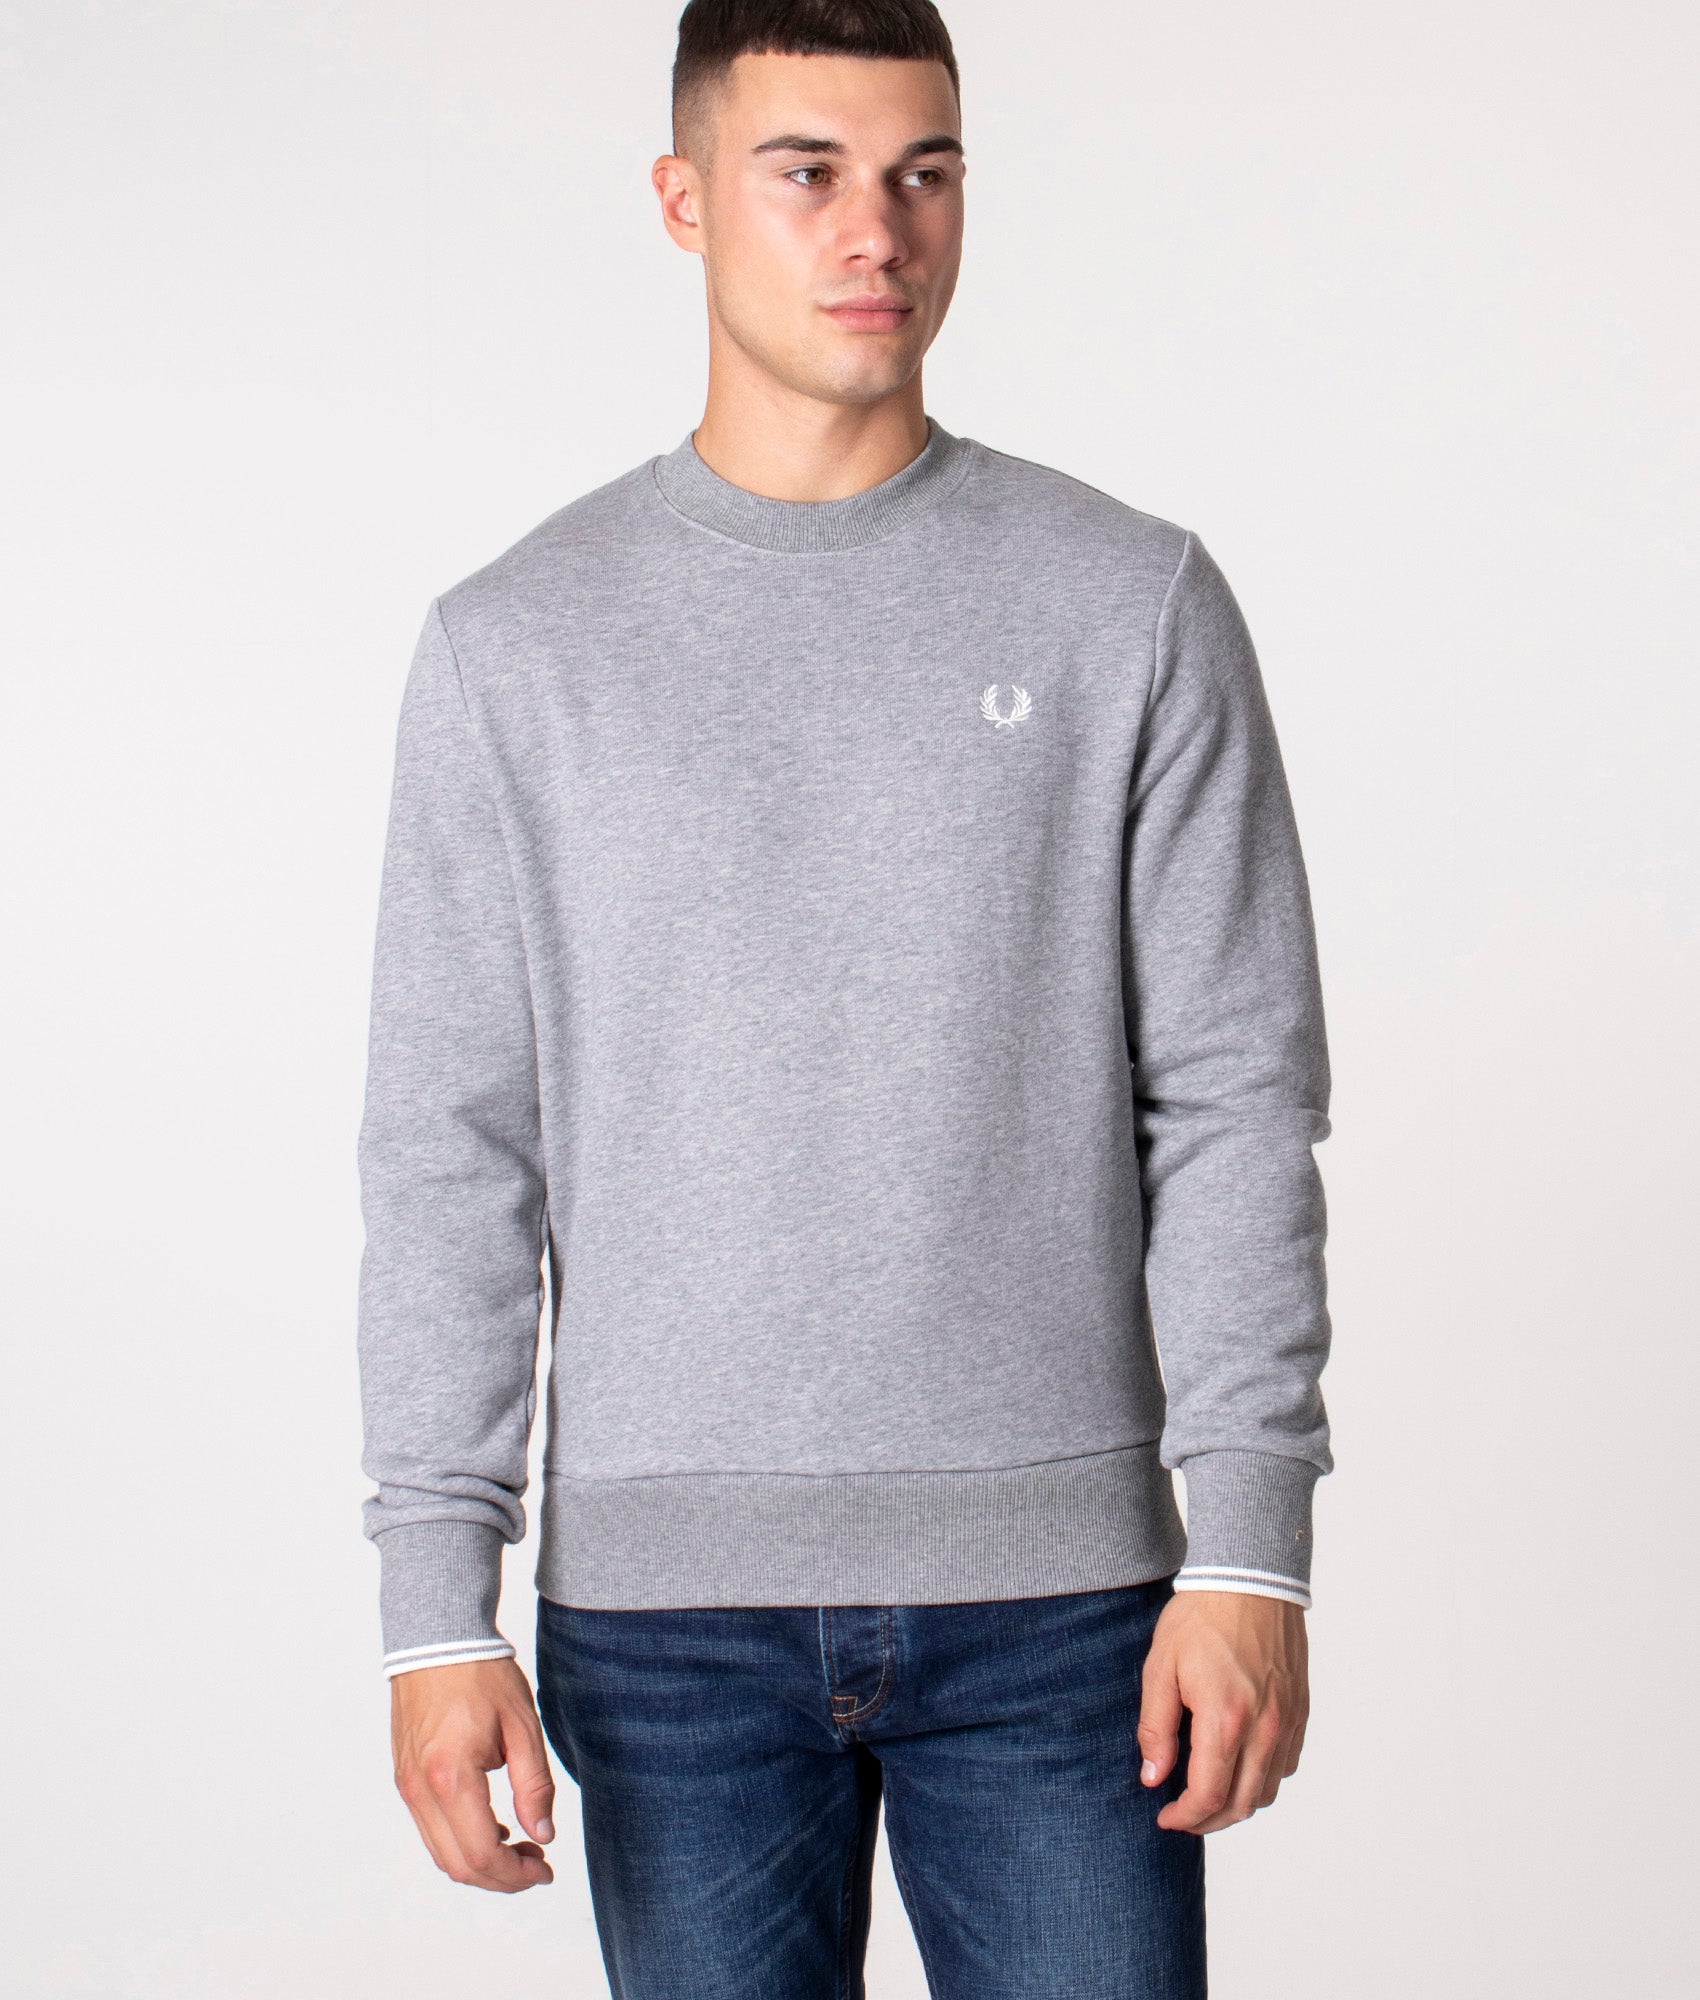 Fred Perry Mens Crew Neck Sweatshirt - Colour: 420 Steel Marl - Size: XXL